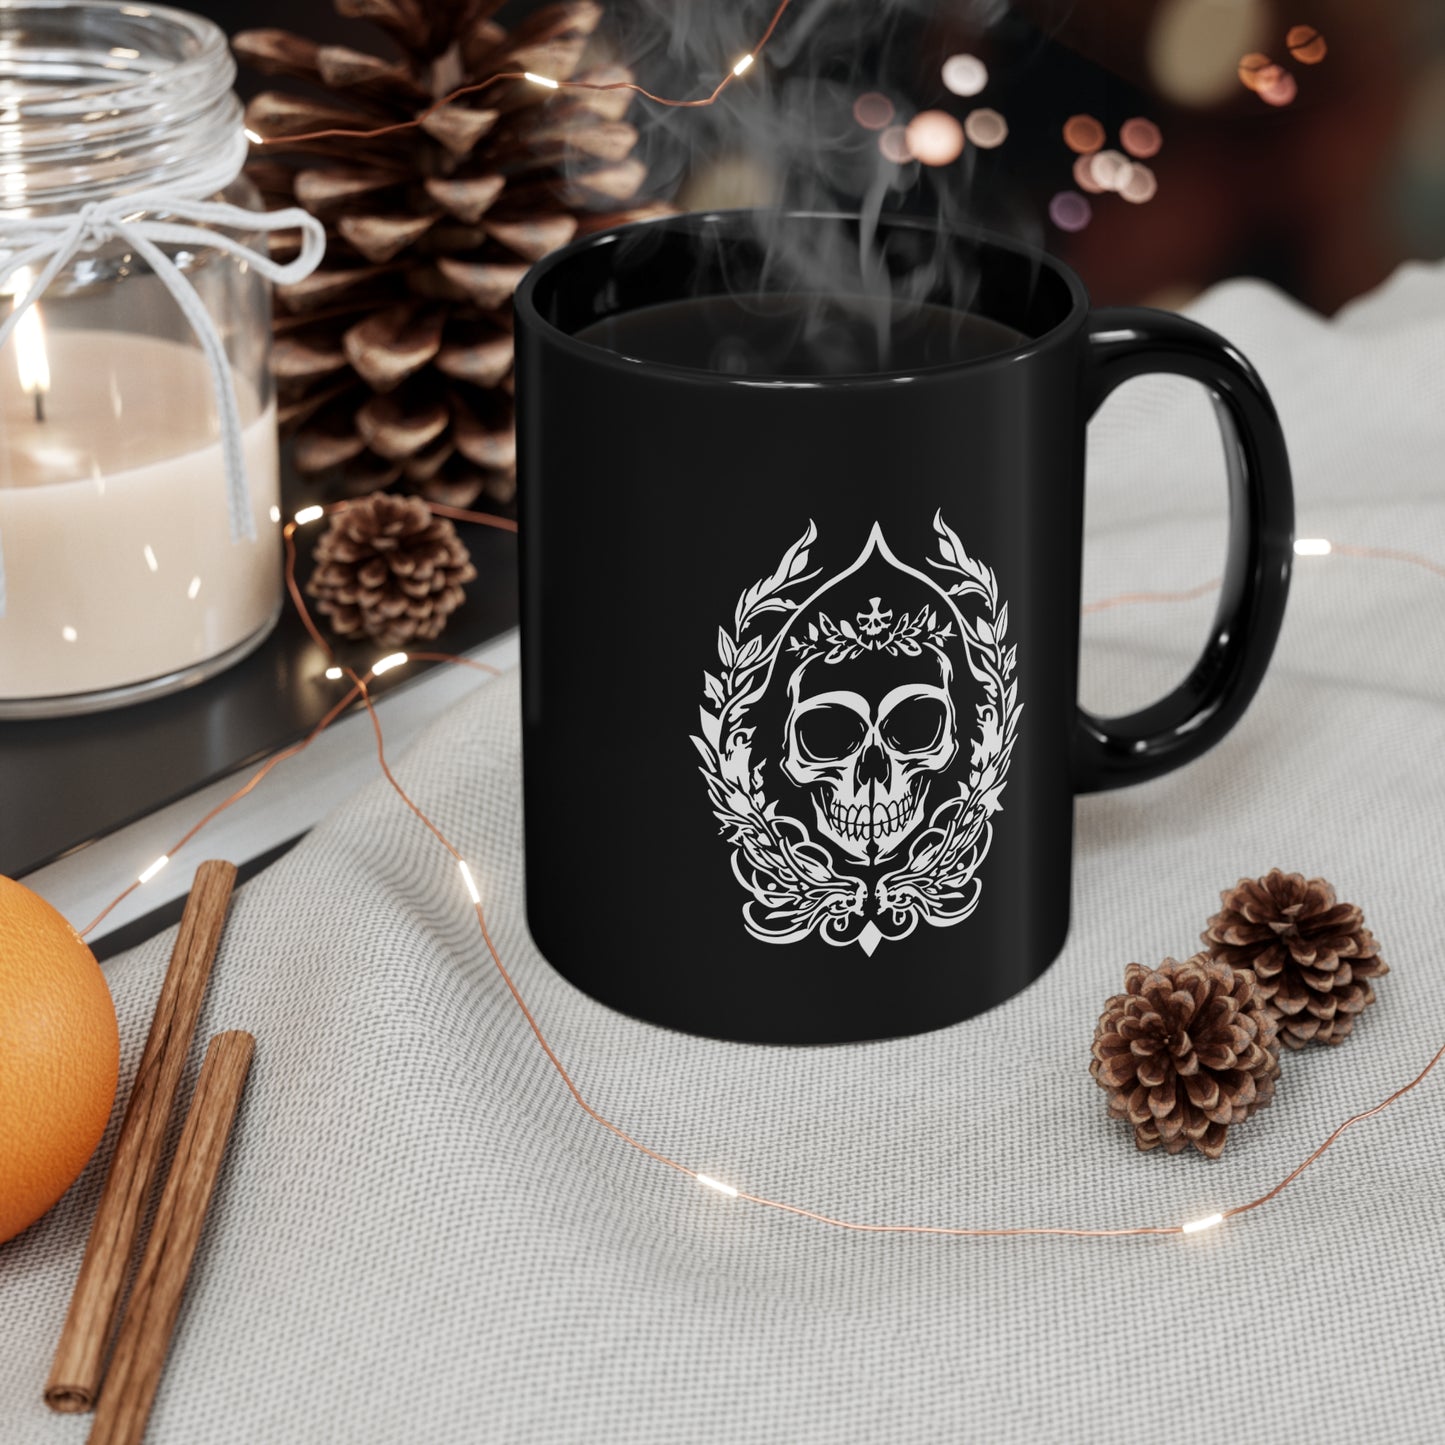 Goth Skull and Leaves - 11oz Black Gothic Cup - Tegusuk Store